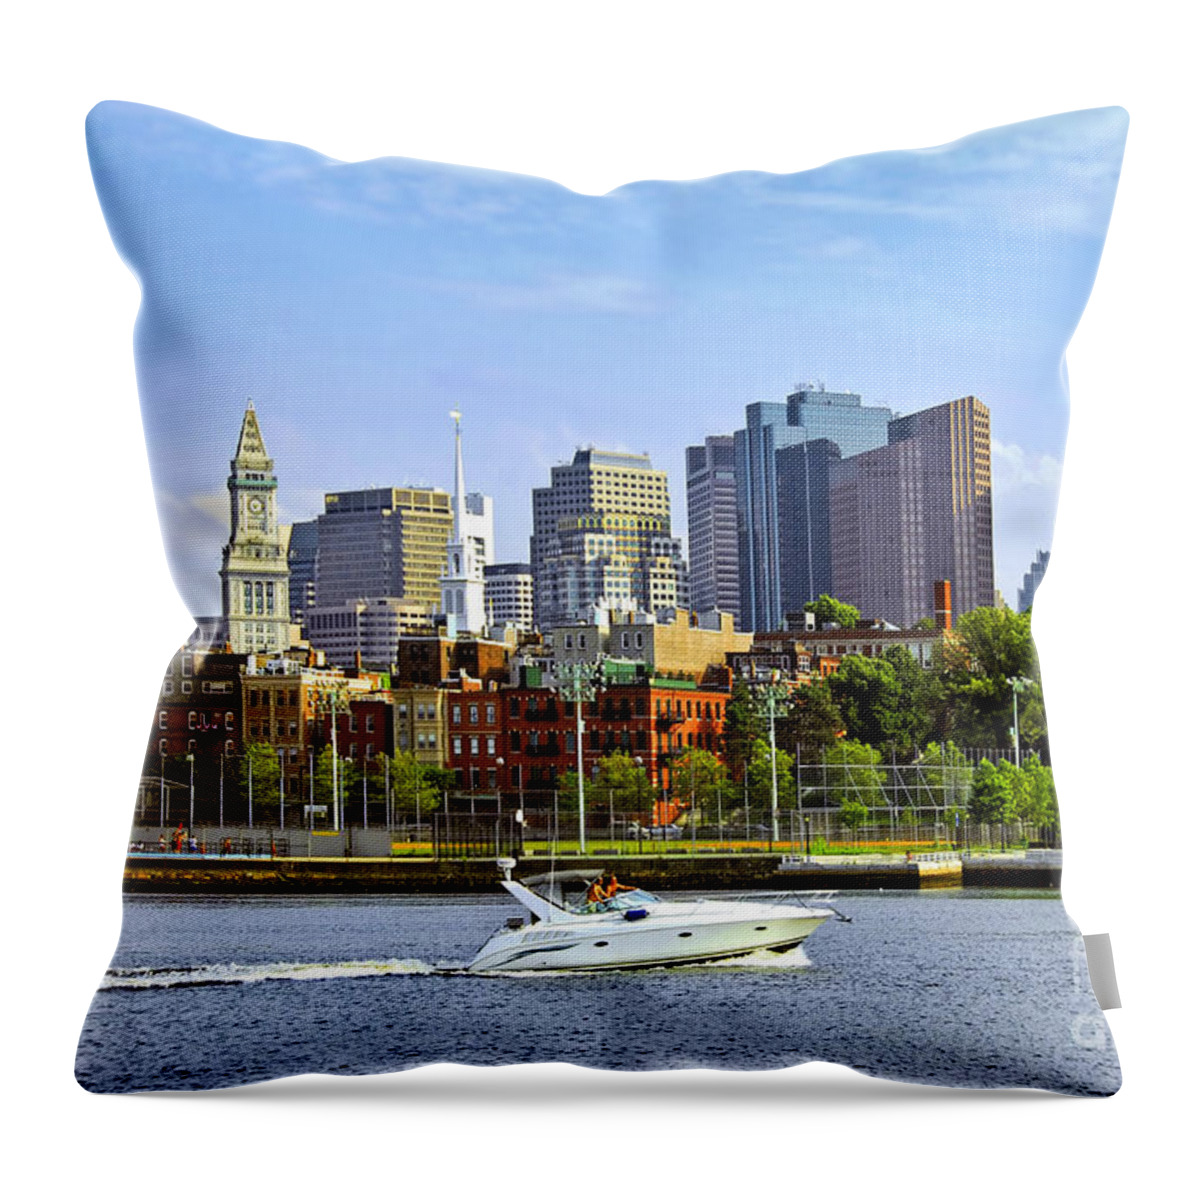 Boat Throw Pillow featuring the photograph Boston skyline by Elena Elisseeva